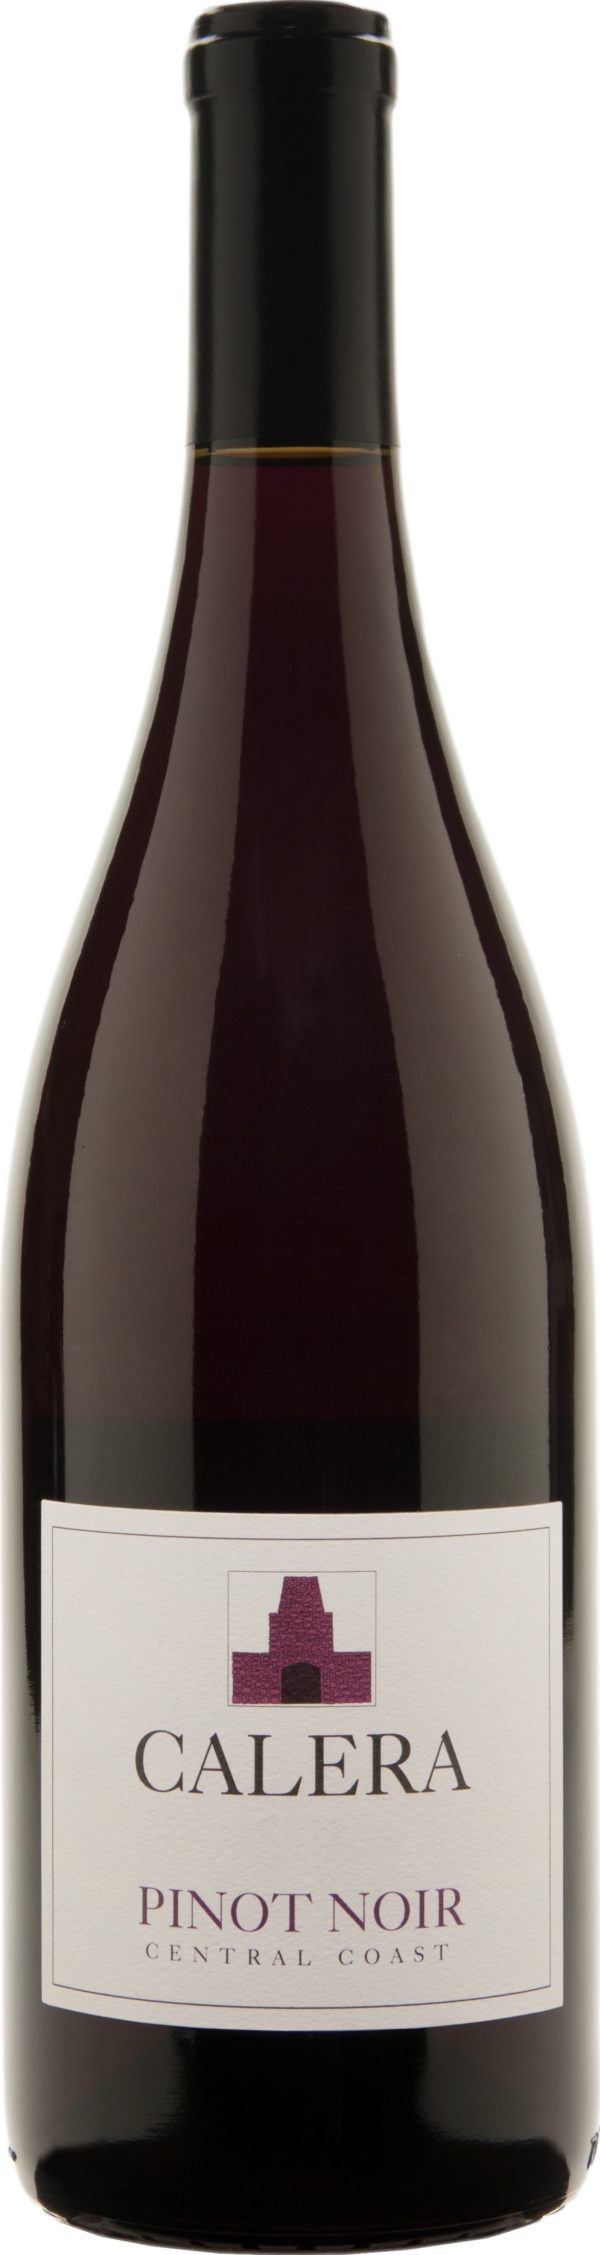 Product image of Calera Central Coast Pinot Noir 2021 from 8wines